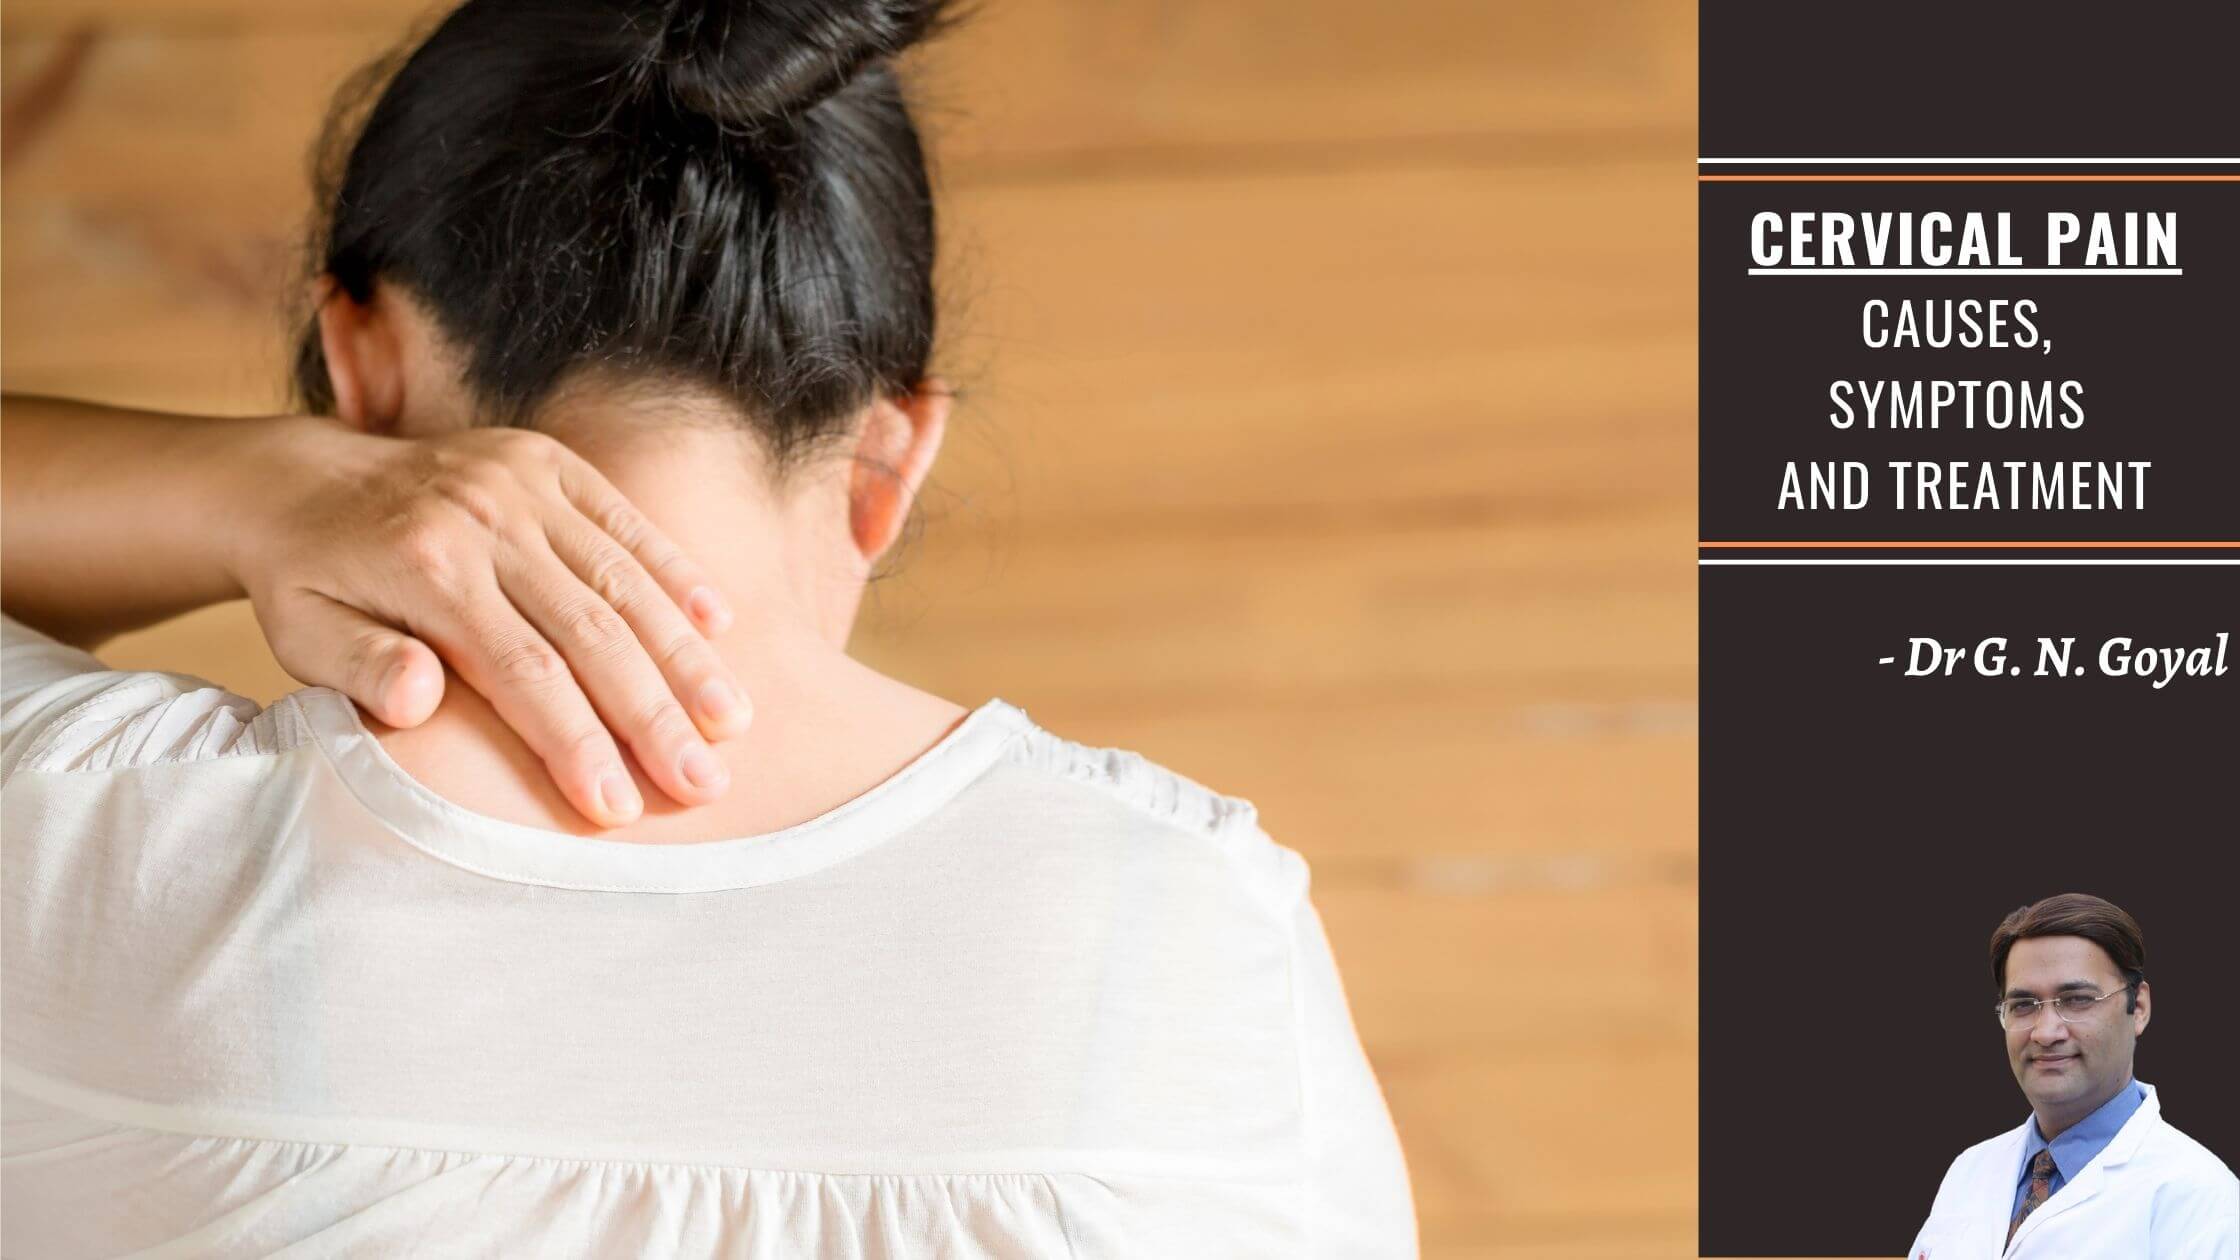 CERVICAL PAIN: SYMPTOMS, CAUSES, AND TREATMENTS